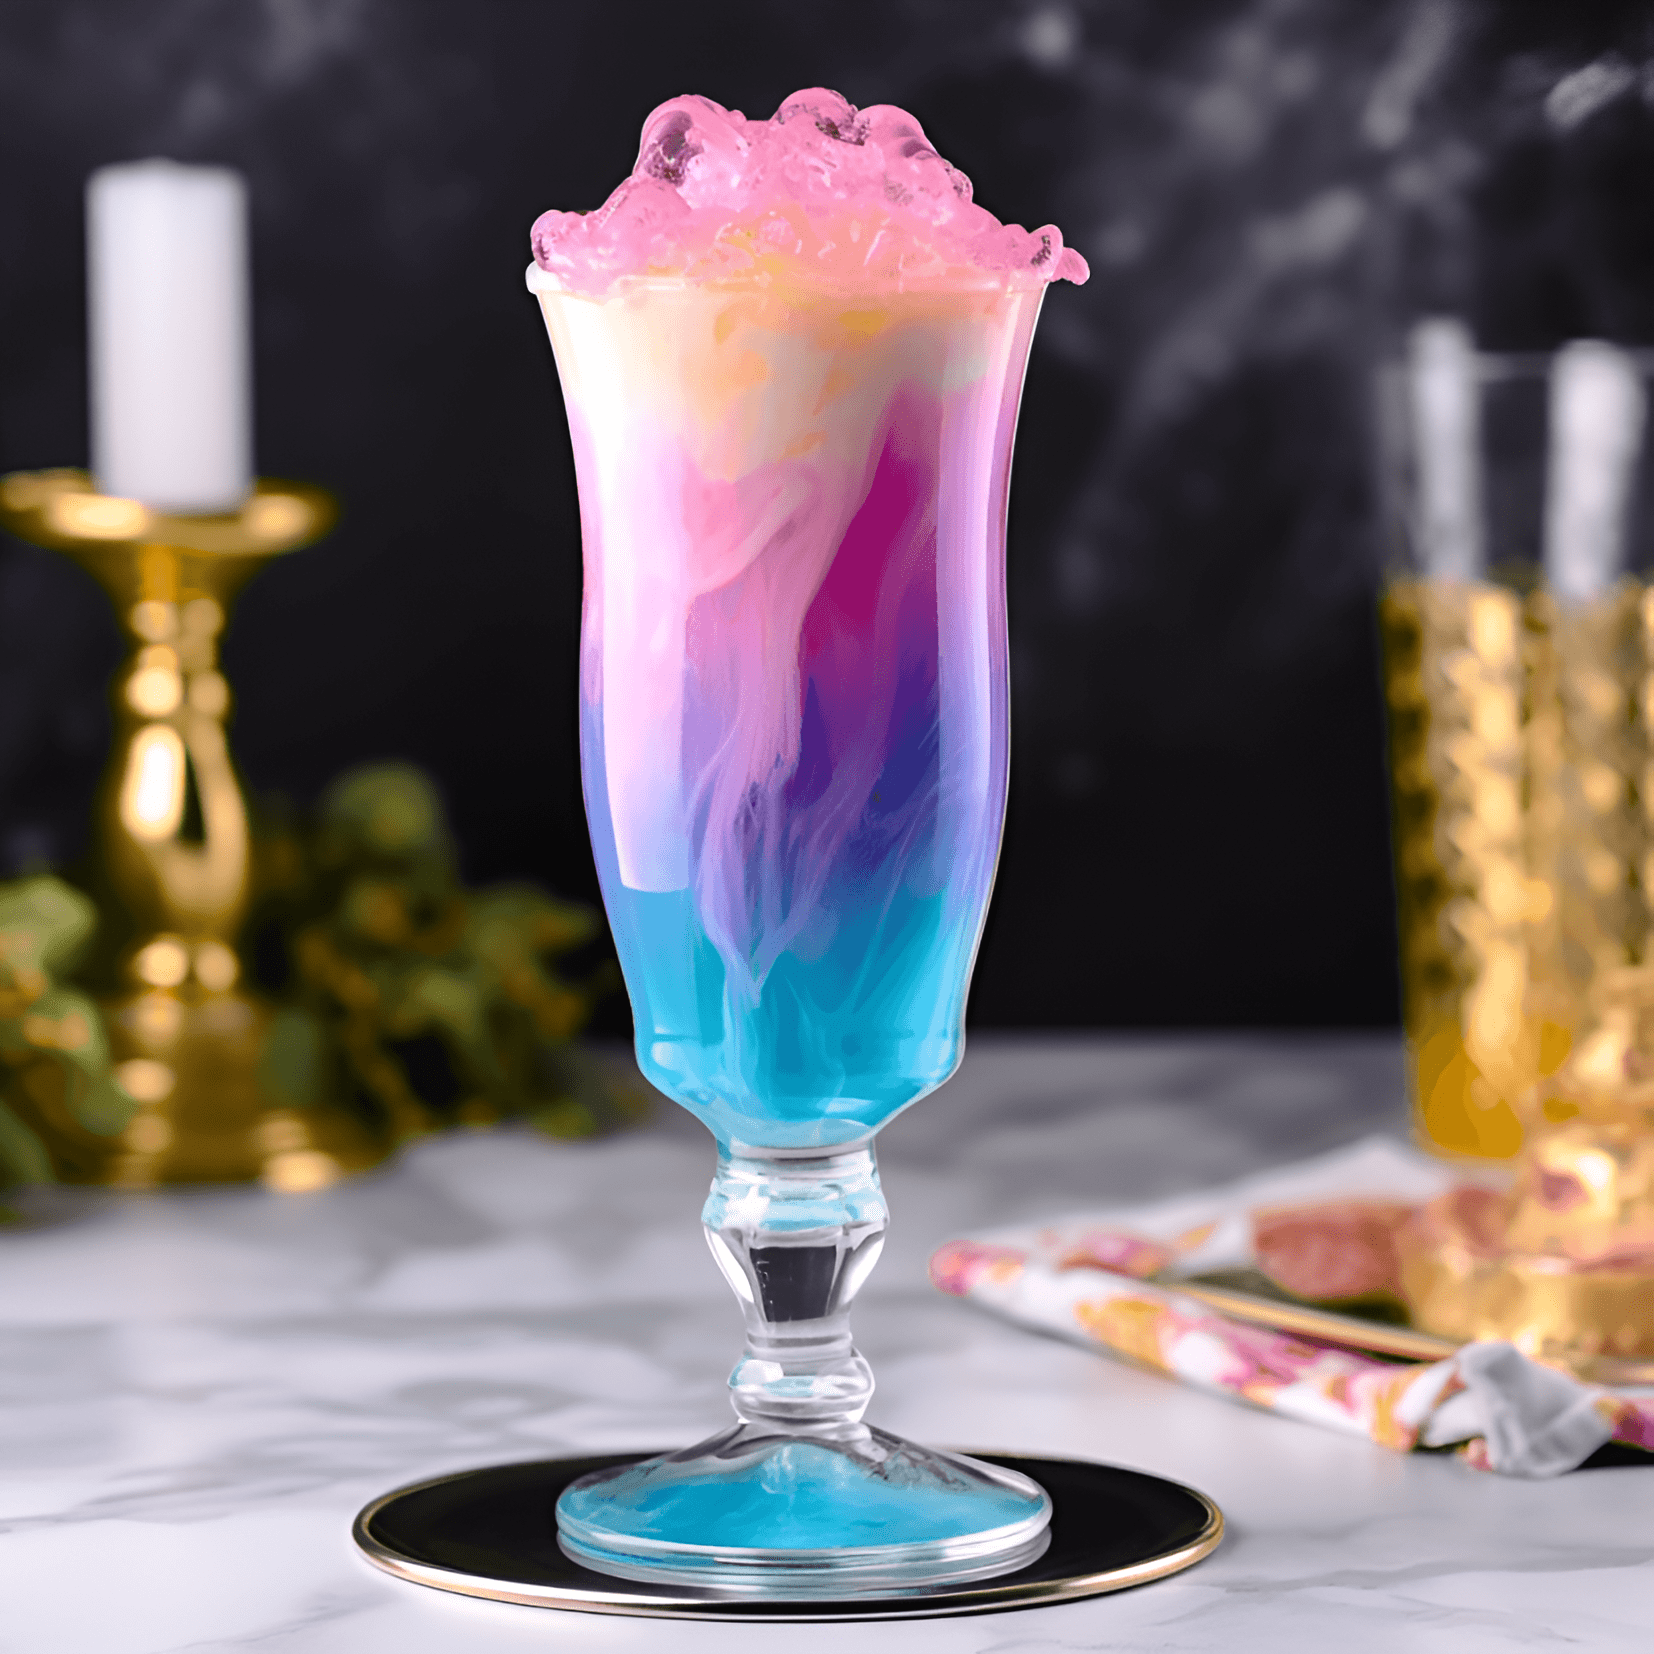 Unicorn Cocktail Recipe - The Unicorn cocktail is a delightful blend of sweet, fruity, and slightly tangy flavors. The combination of ingredients creates a refreshing and light taste, with a hint of creaminess and a touch of sparkle.